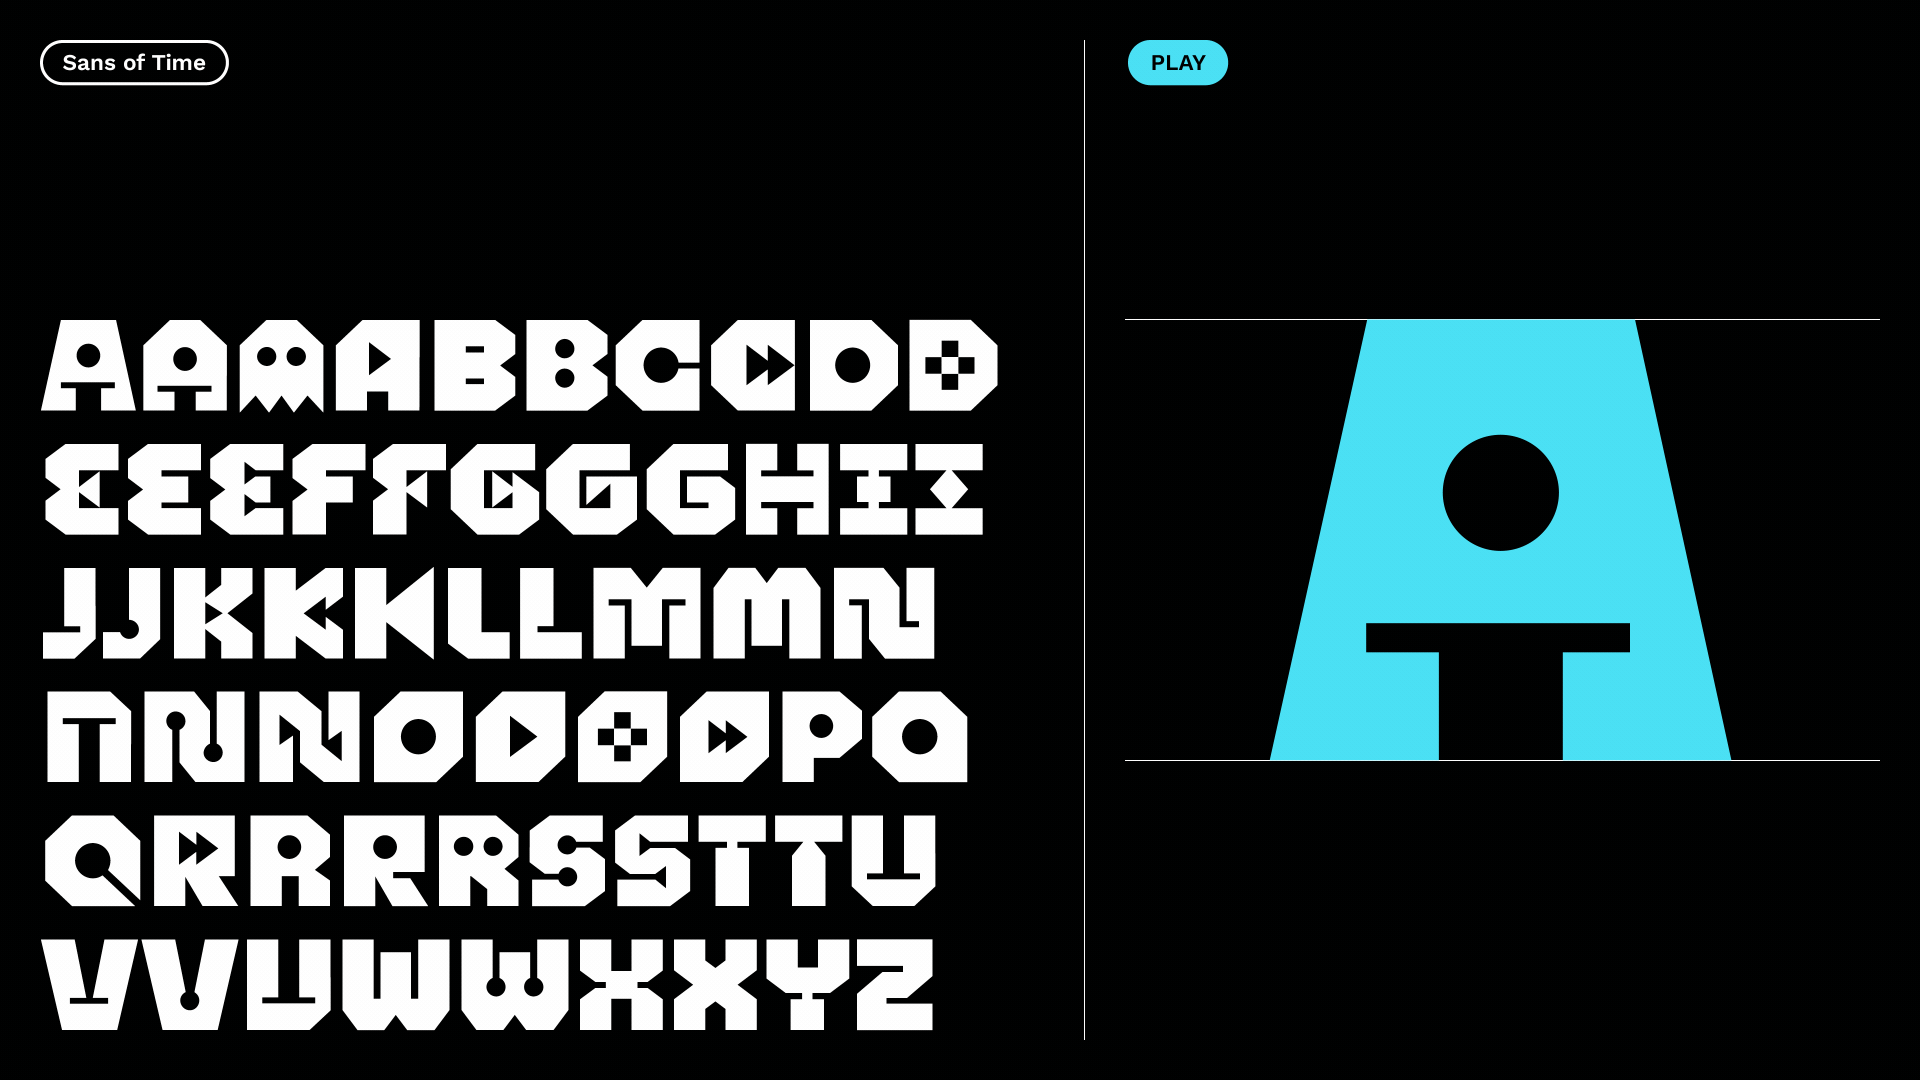 Brand identity and custom typeface for Malaysian broadband and internet service provide Time designed by For The People